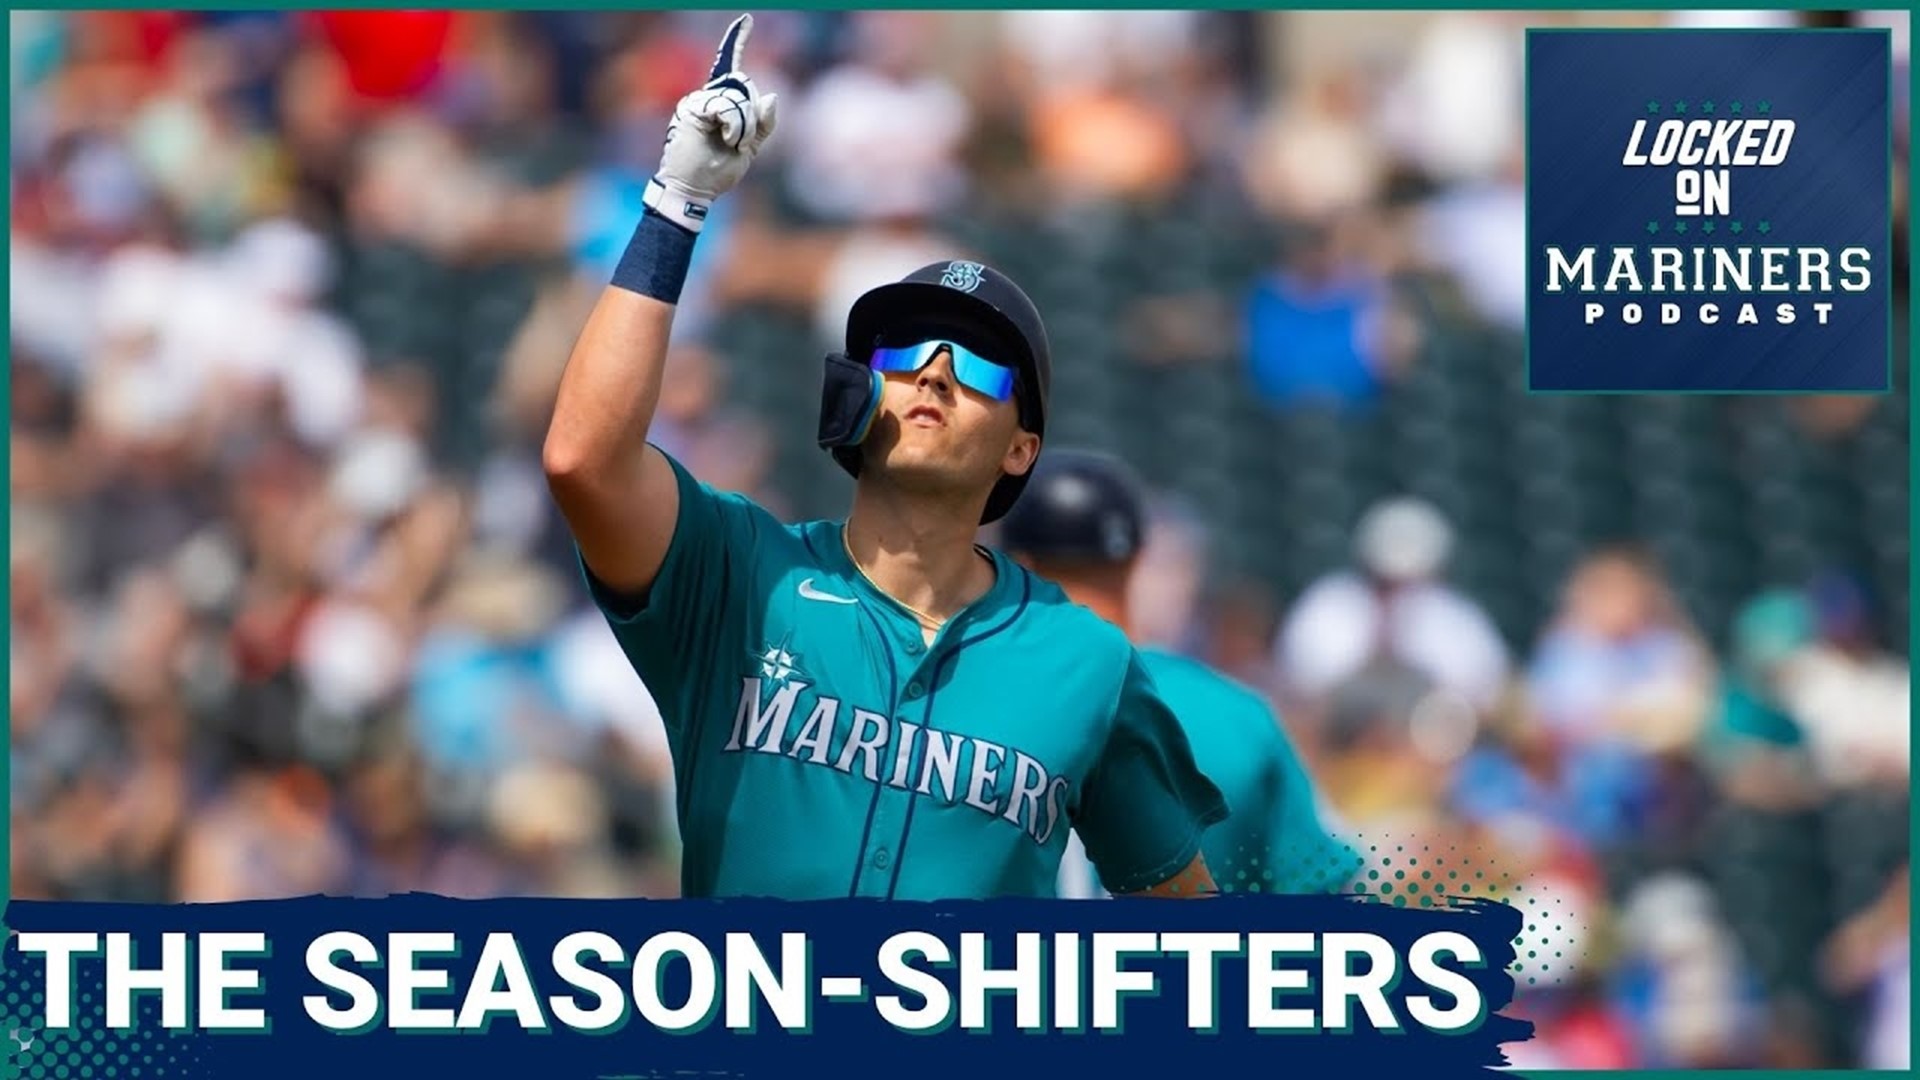 We know a lot rides on the shoulders of Julio Rodríguez, Cal Raleigh, Luis Castillo, and the rest of the Mariners' core players.